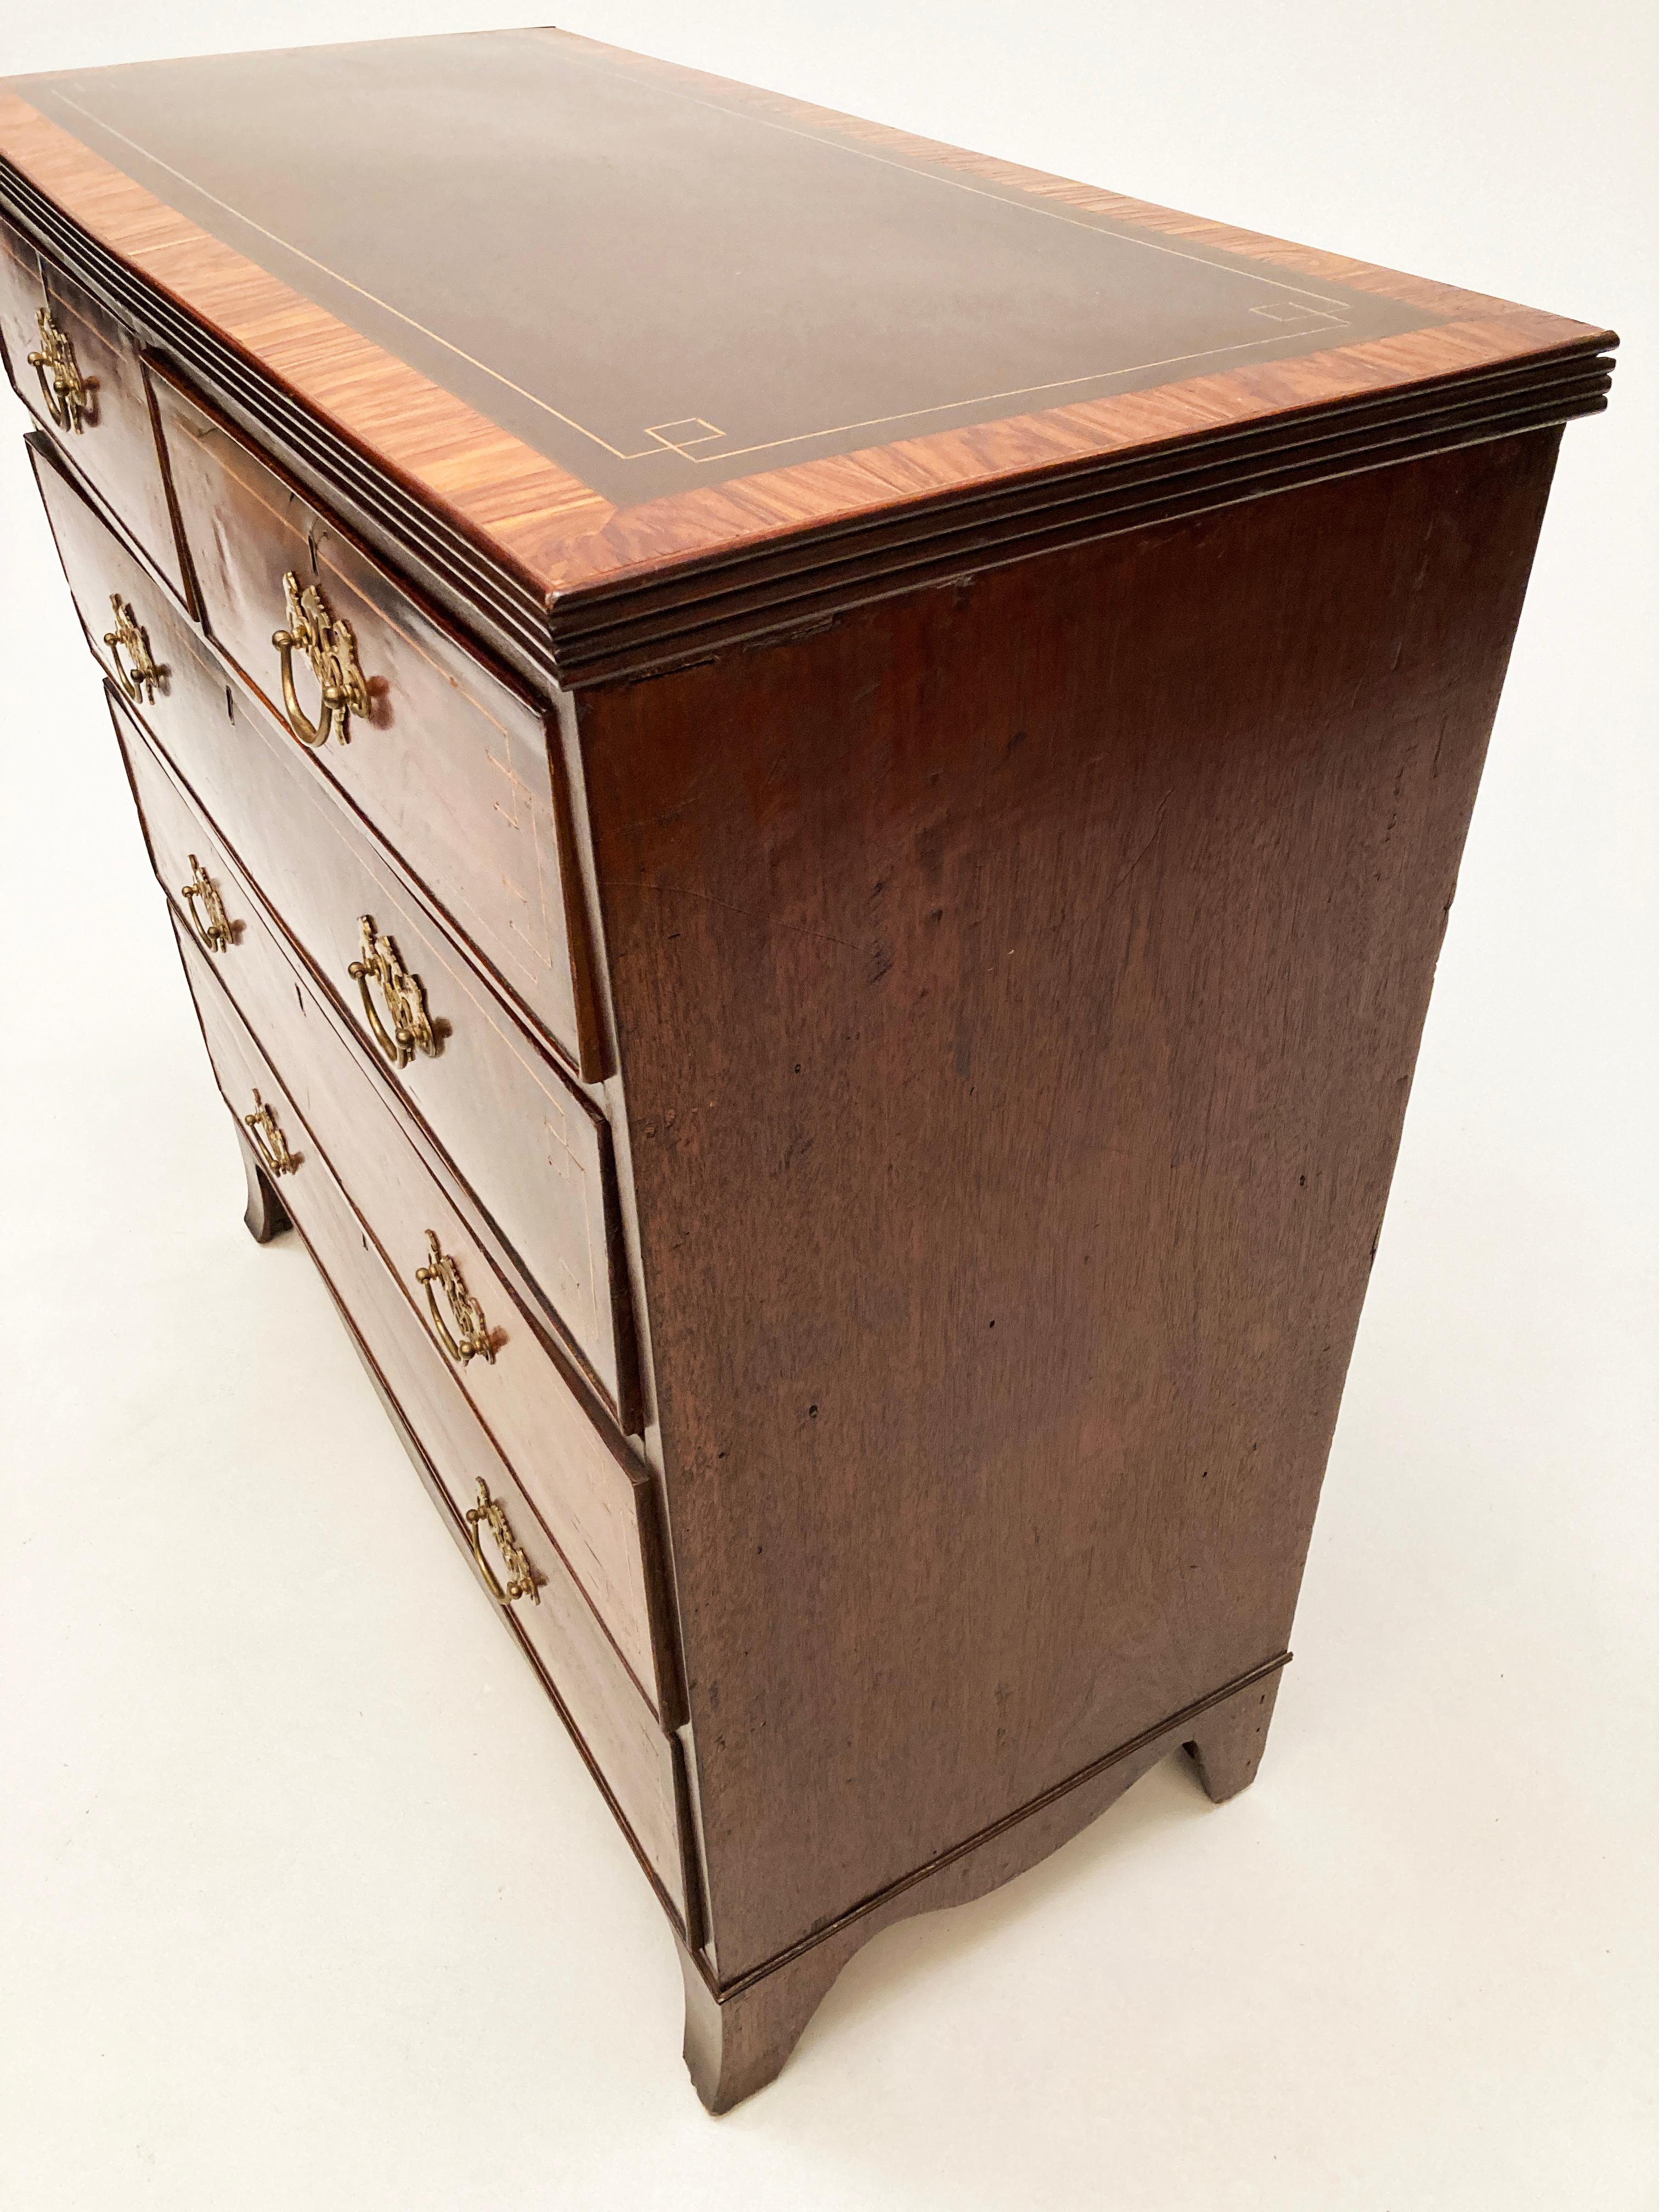 1740’s King George III Flame Mahogany Rosewood and Tulipwood Chest of Drawers In Good Condition For Sale In Louisville, KY